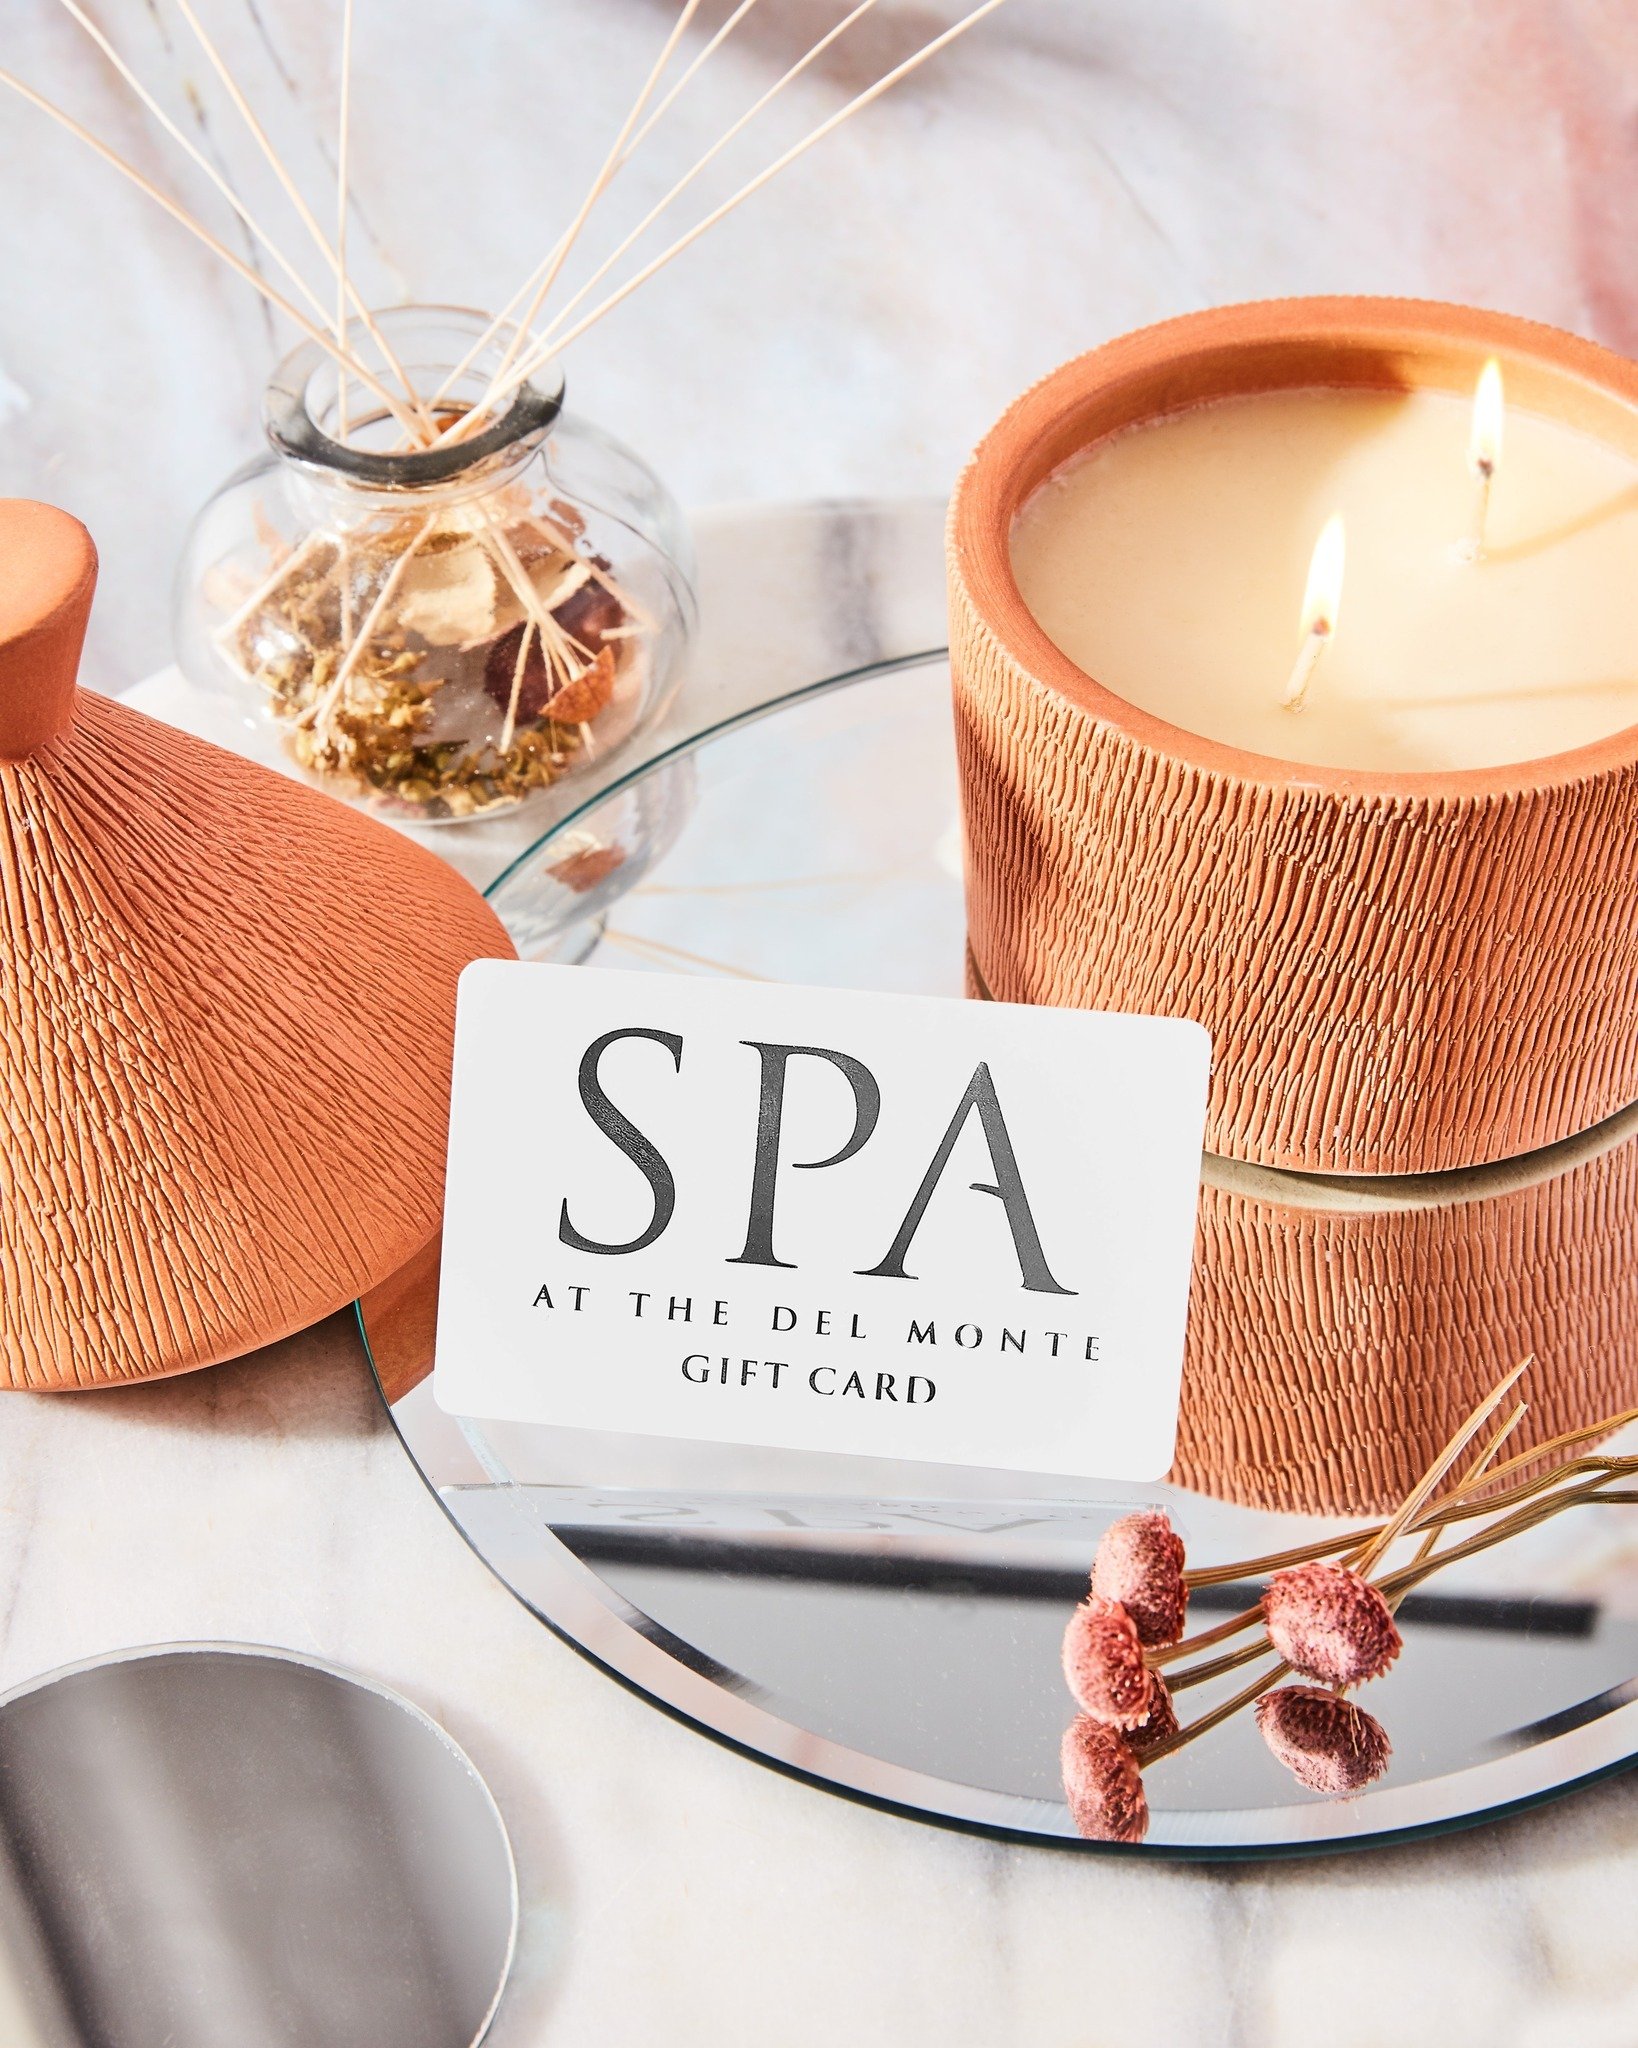 Mom by chance, besties by choice 🫶🏼
.
.
.
Mother's Day is TOMORROW, so don't wait to get her exactly what she wants! A Spa at the Del Monte gift card is ready and waiting for her 😉
.
#delmontespa #skinhealth #spalife #spalife #spa #dayspa #pittsfo